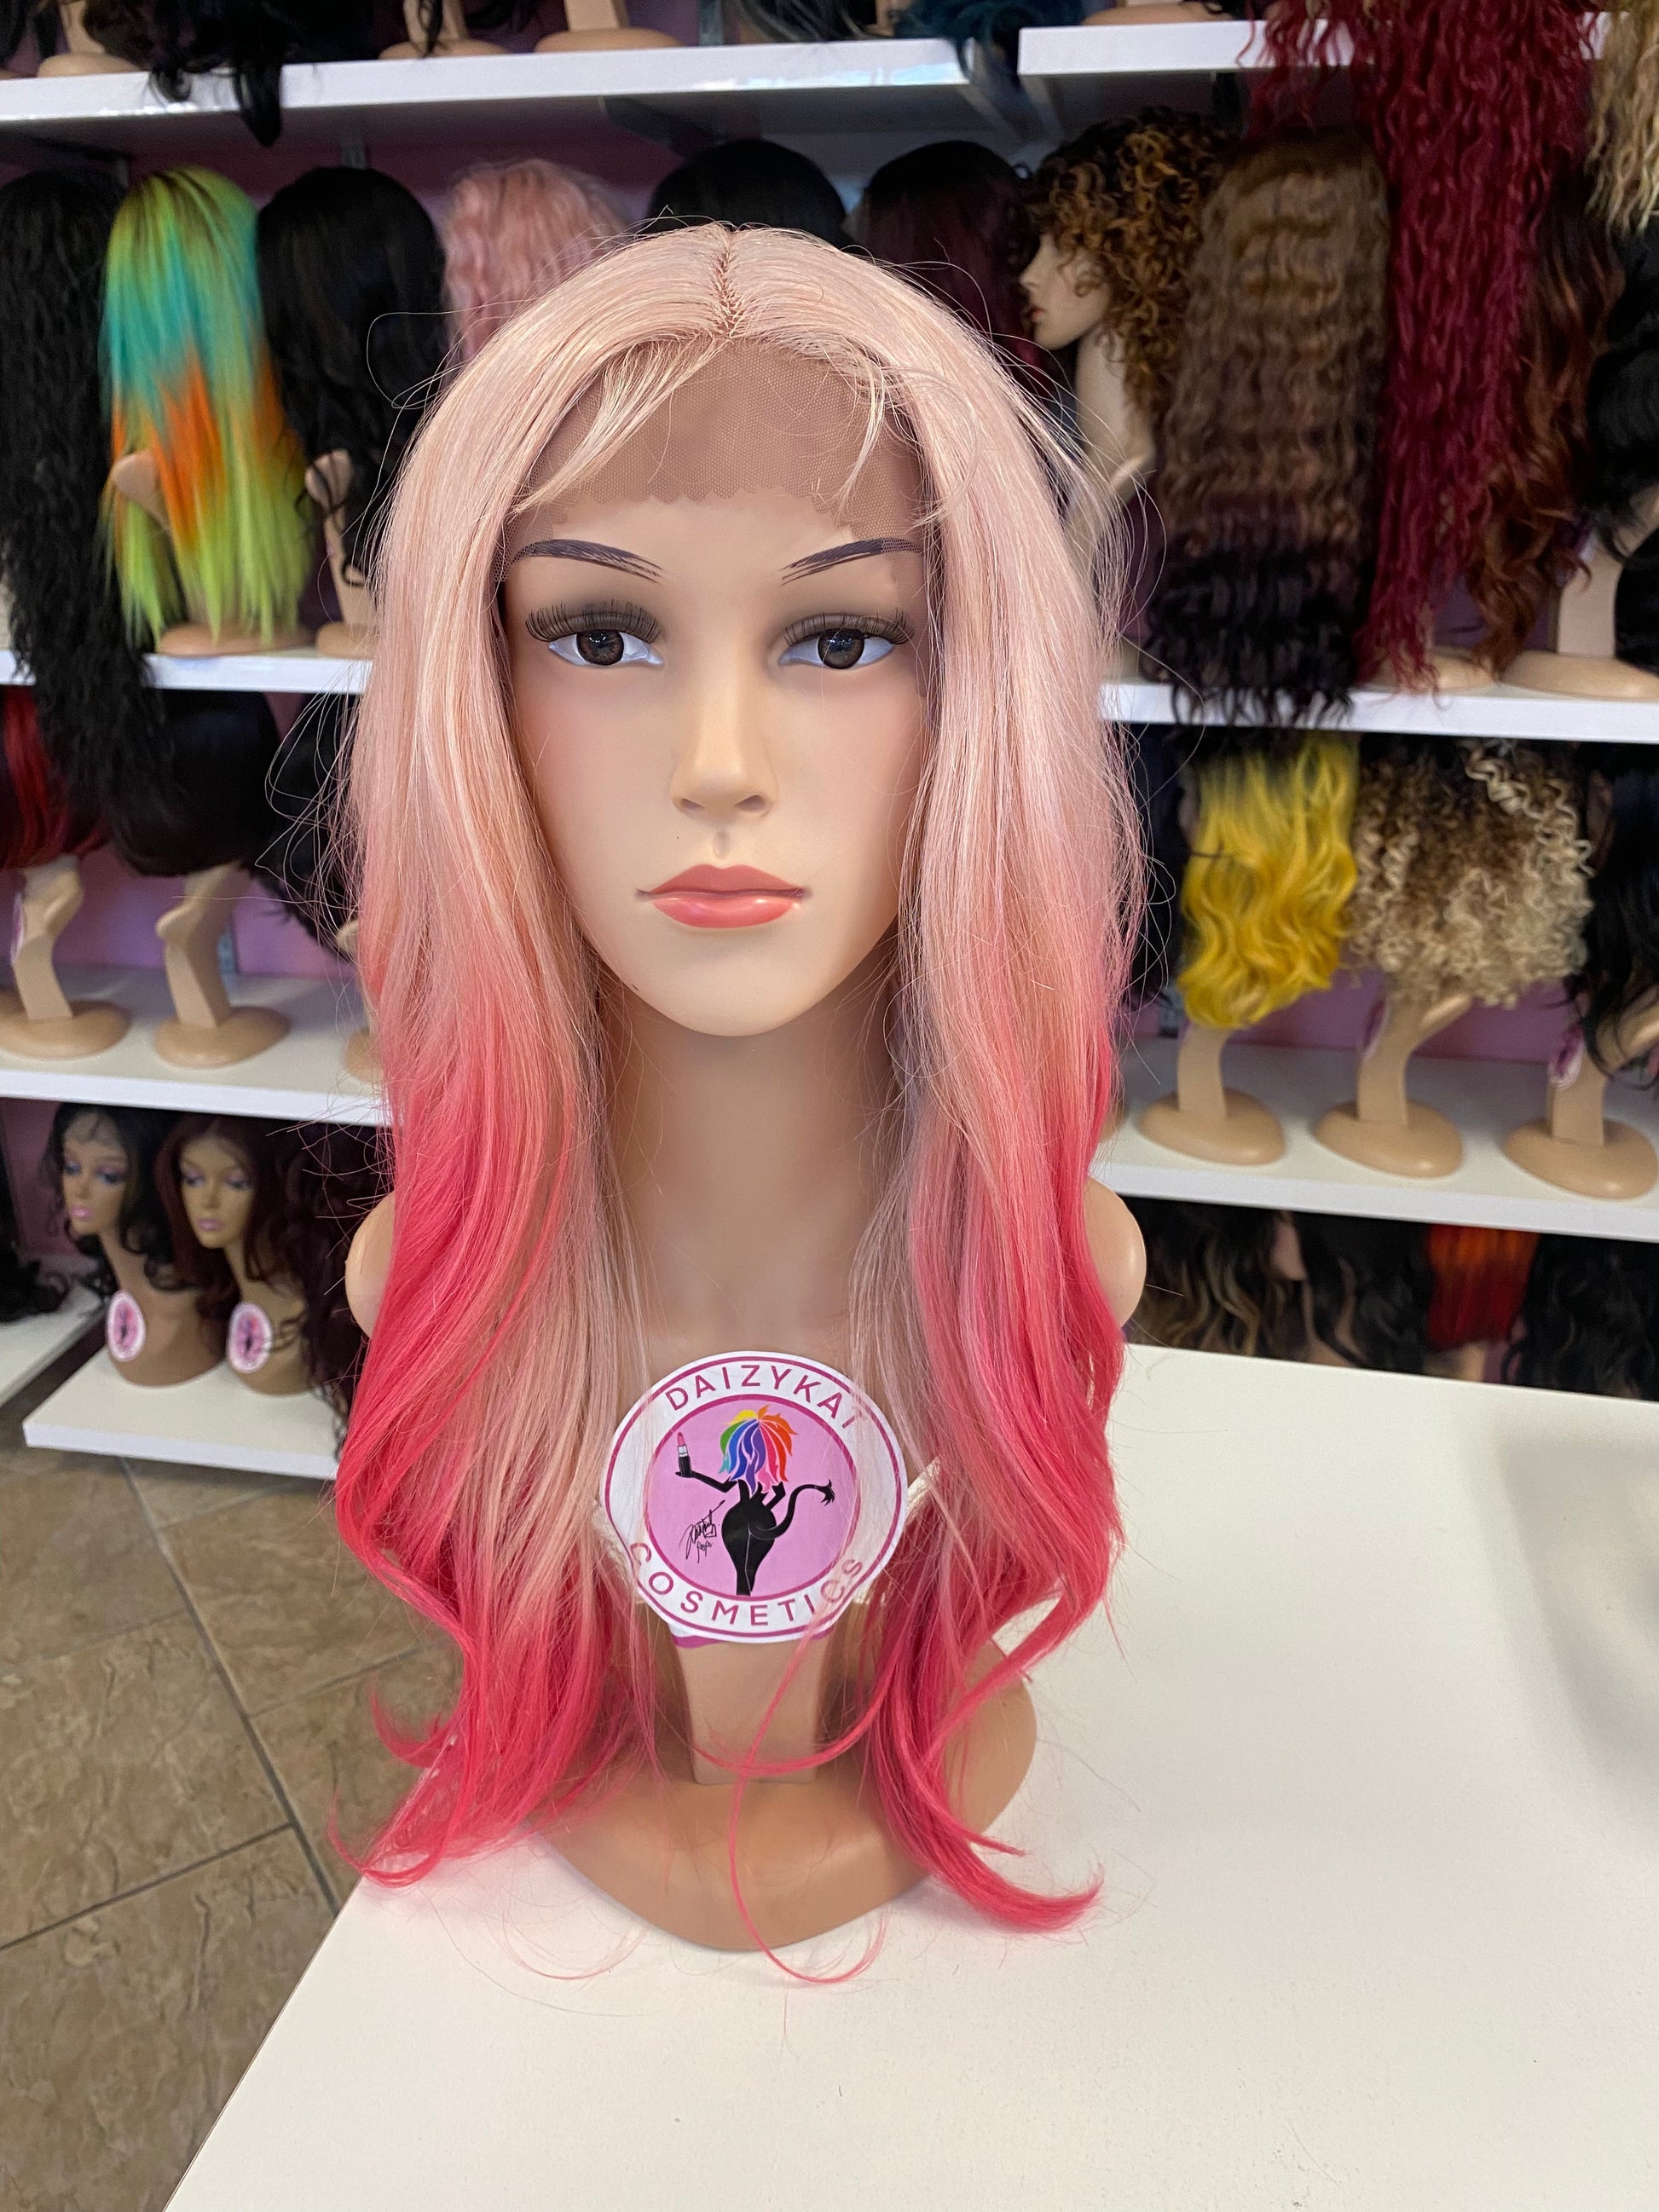 446 Harper - Middle Part Lace Front Wig - PINK FADE - DaizyKat Cosmetics 446 Harper - Middle Part Lace Front Wig - PINK FADE DaizyKat Cosmetics Wigs